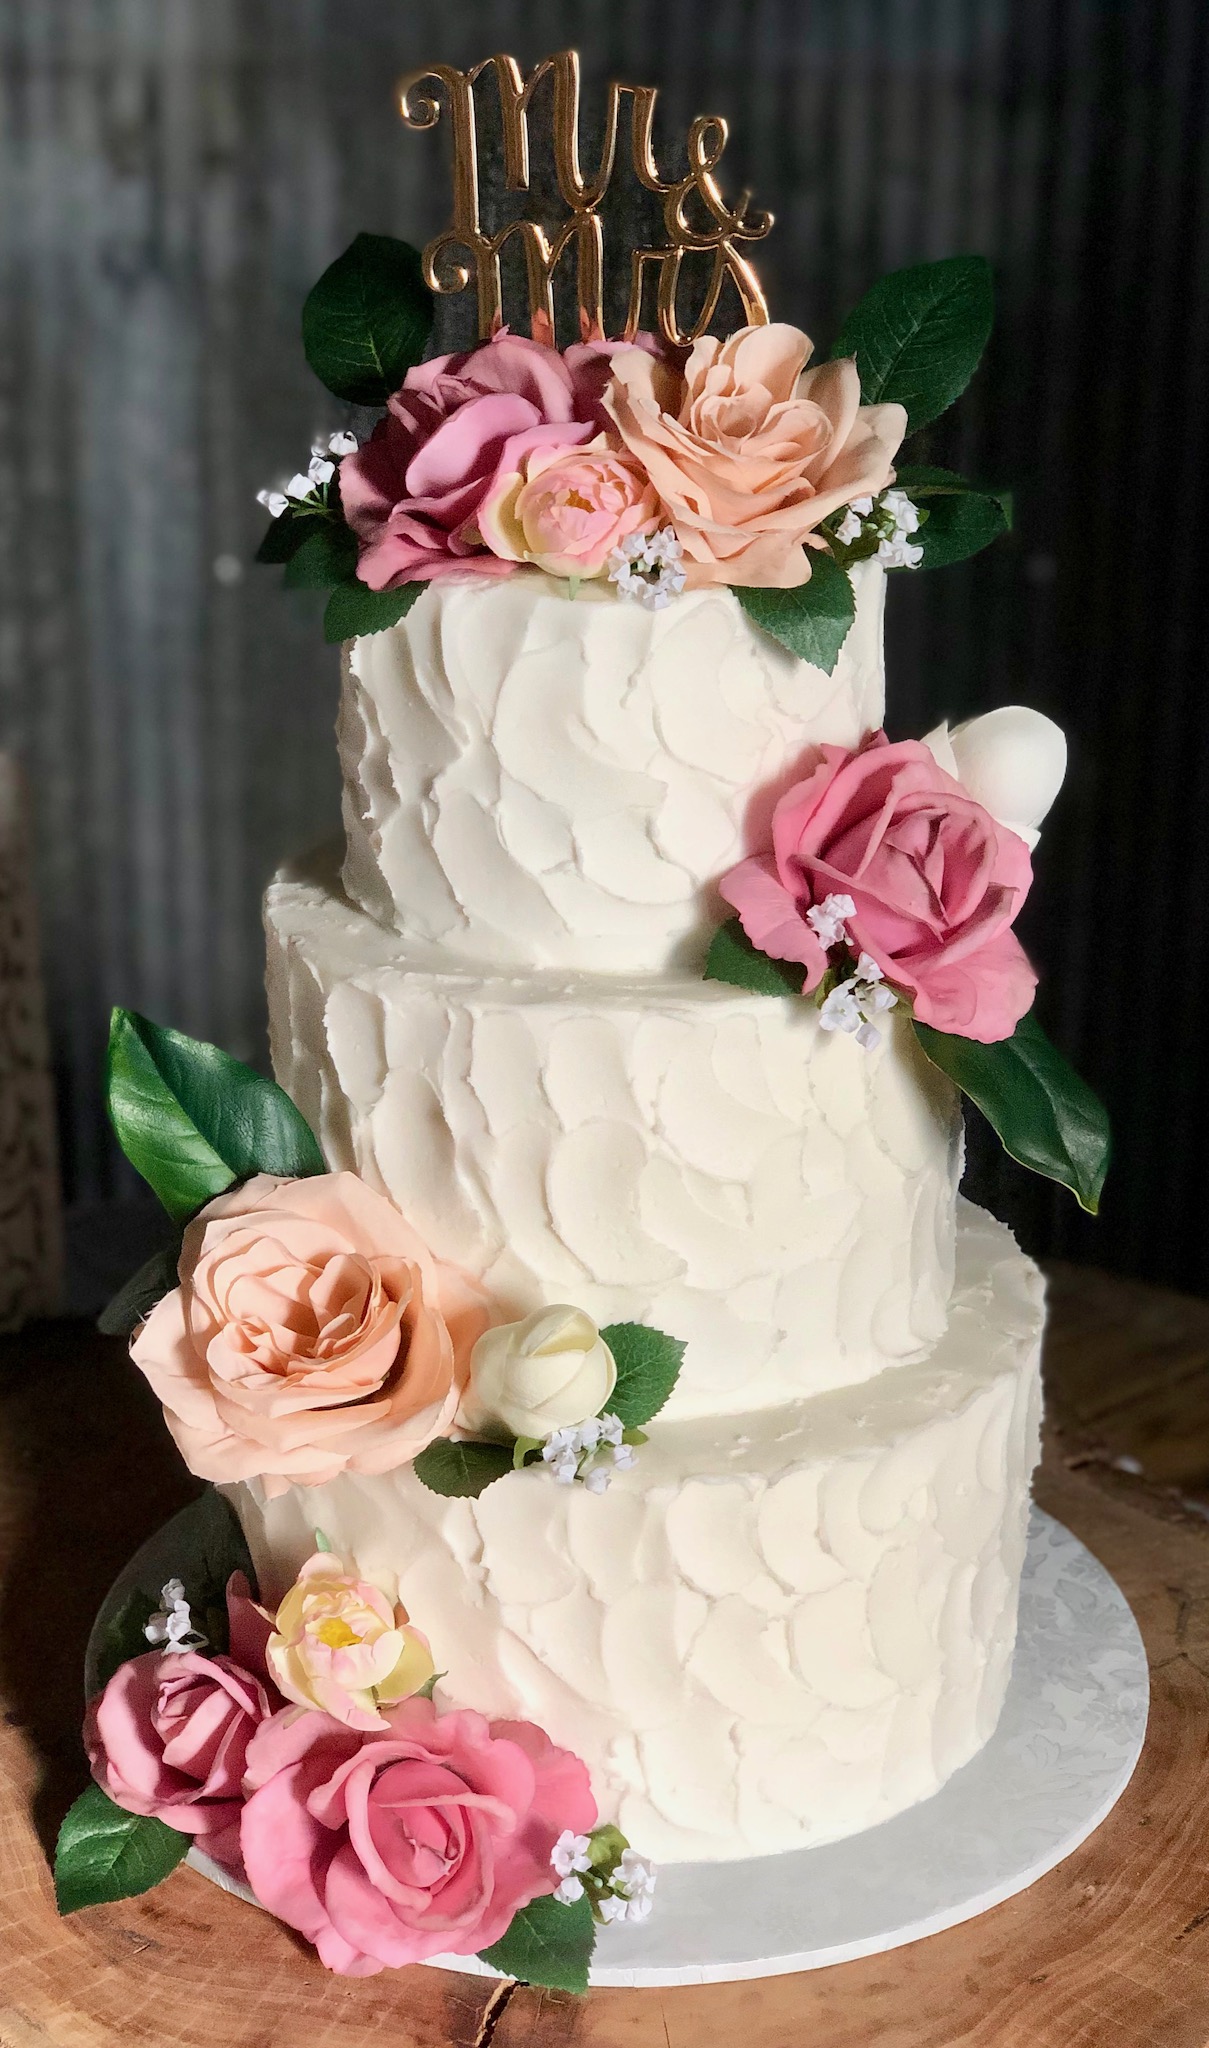 3 Tier while faceted wedding cake with roses as decoration